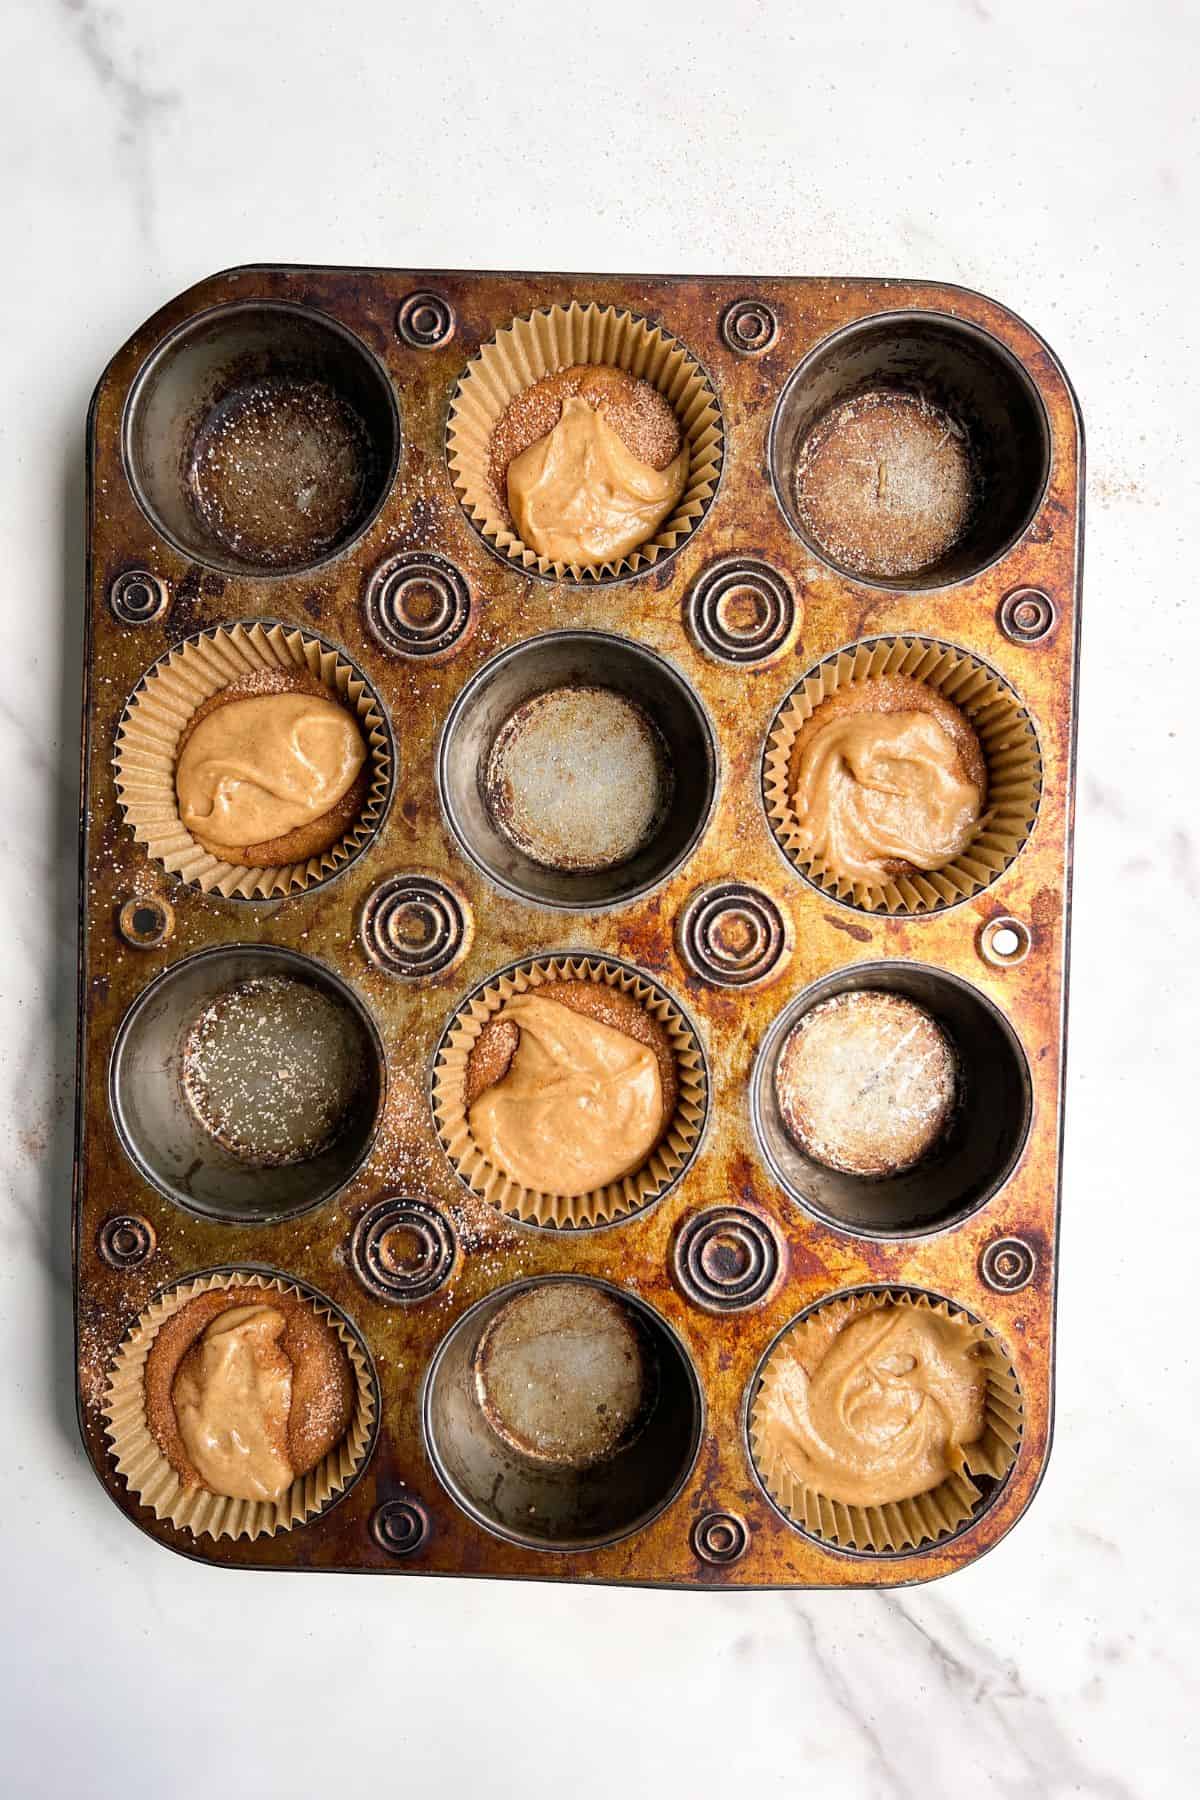 Cinnamon Streusel Muffin Batter poured into the muffin holders.